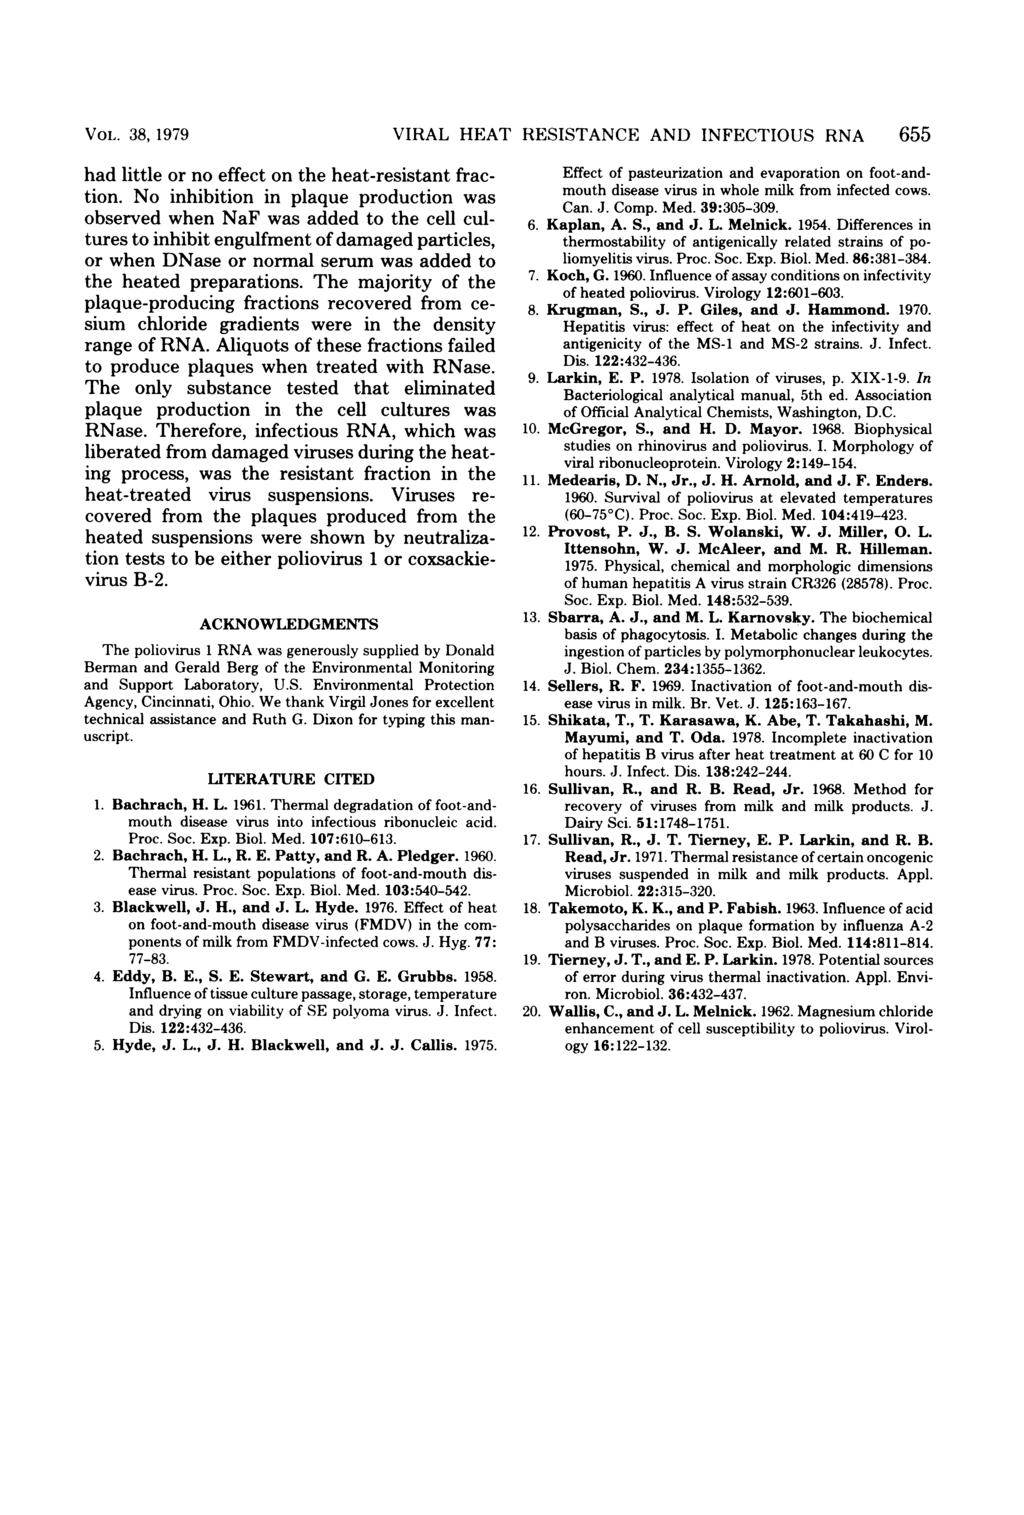 VOL. 38, 1979 had little or no effect on the heat-resistant fraction.